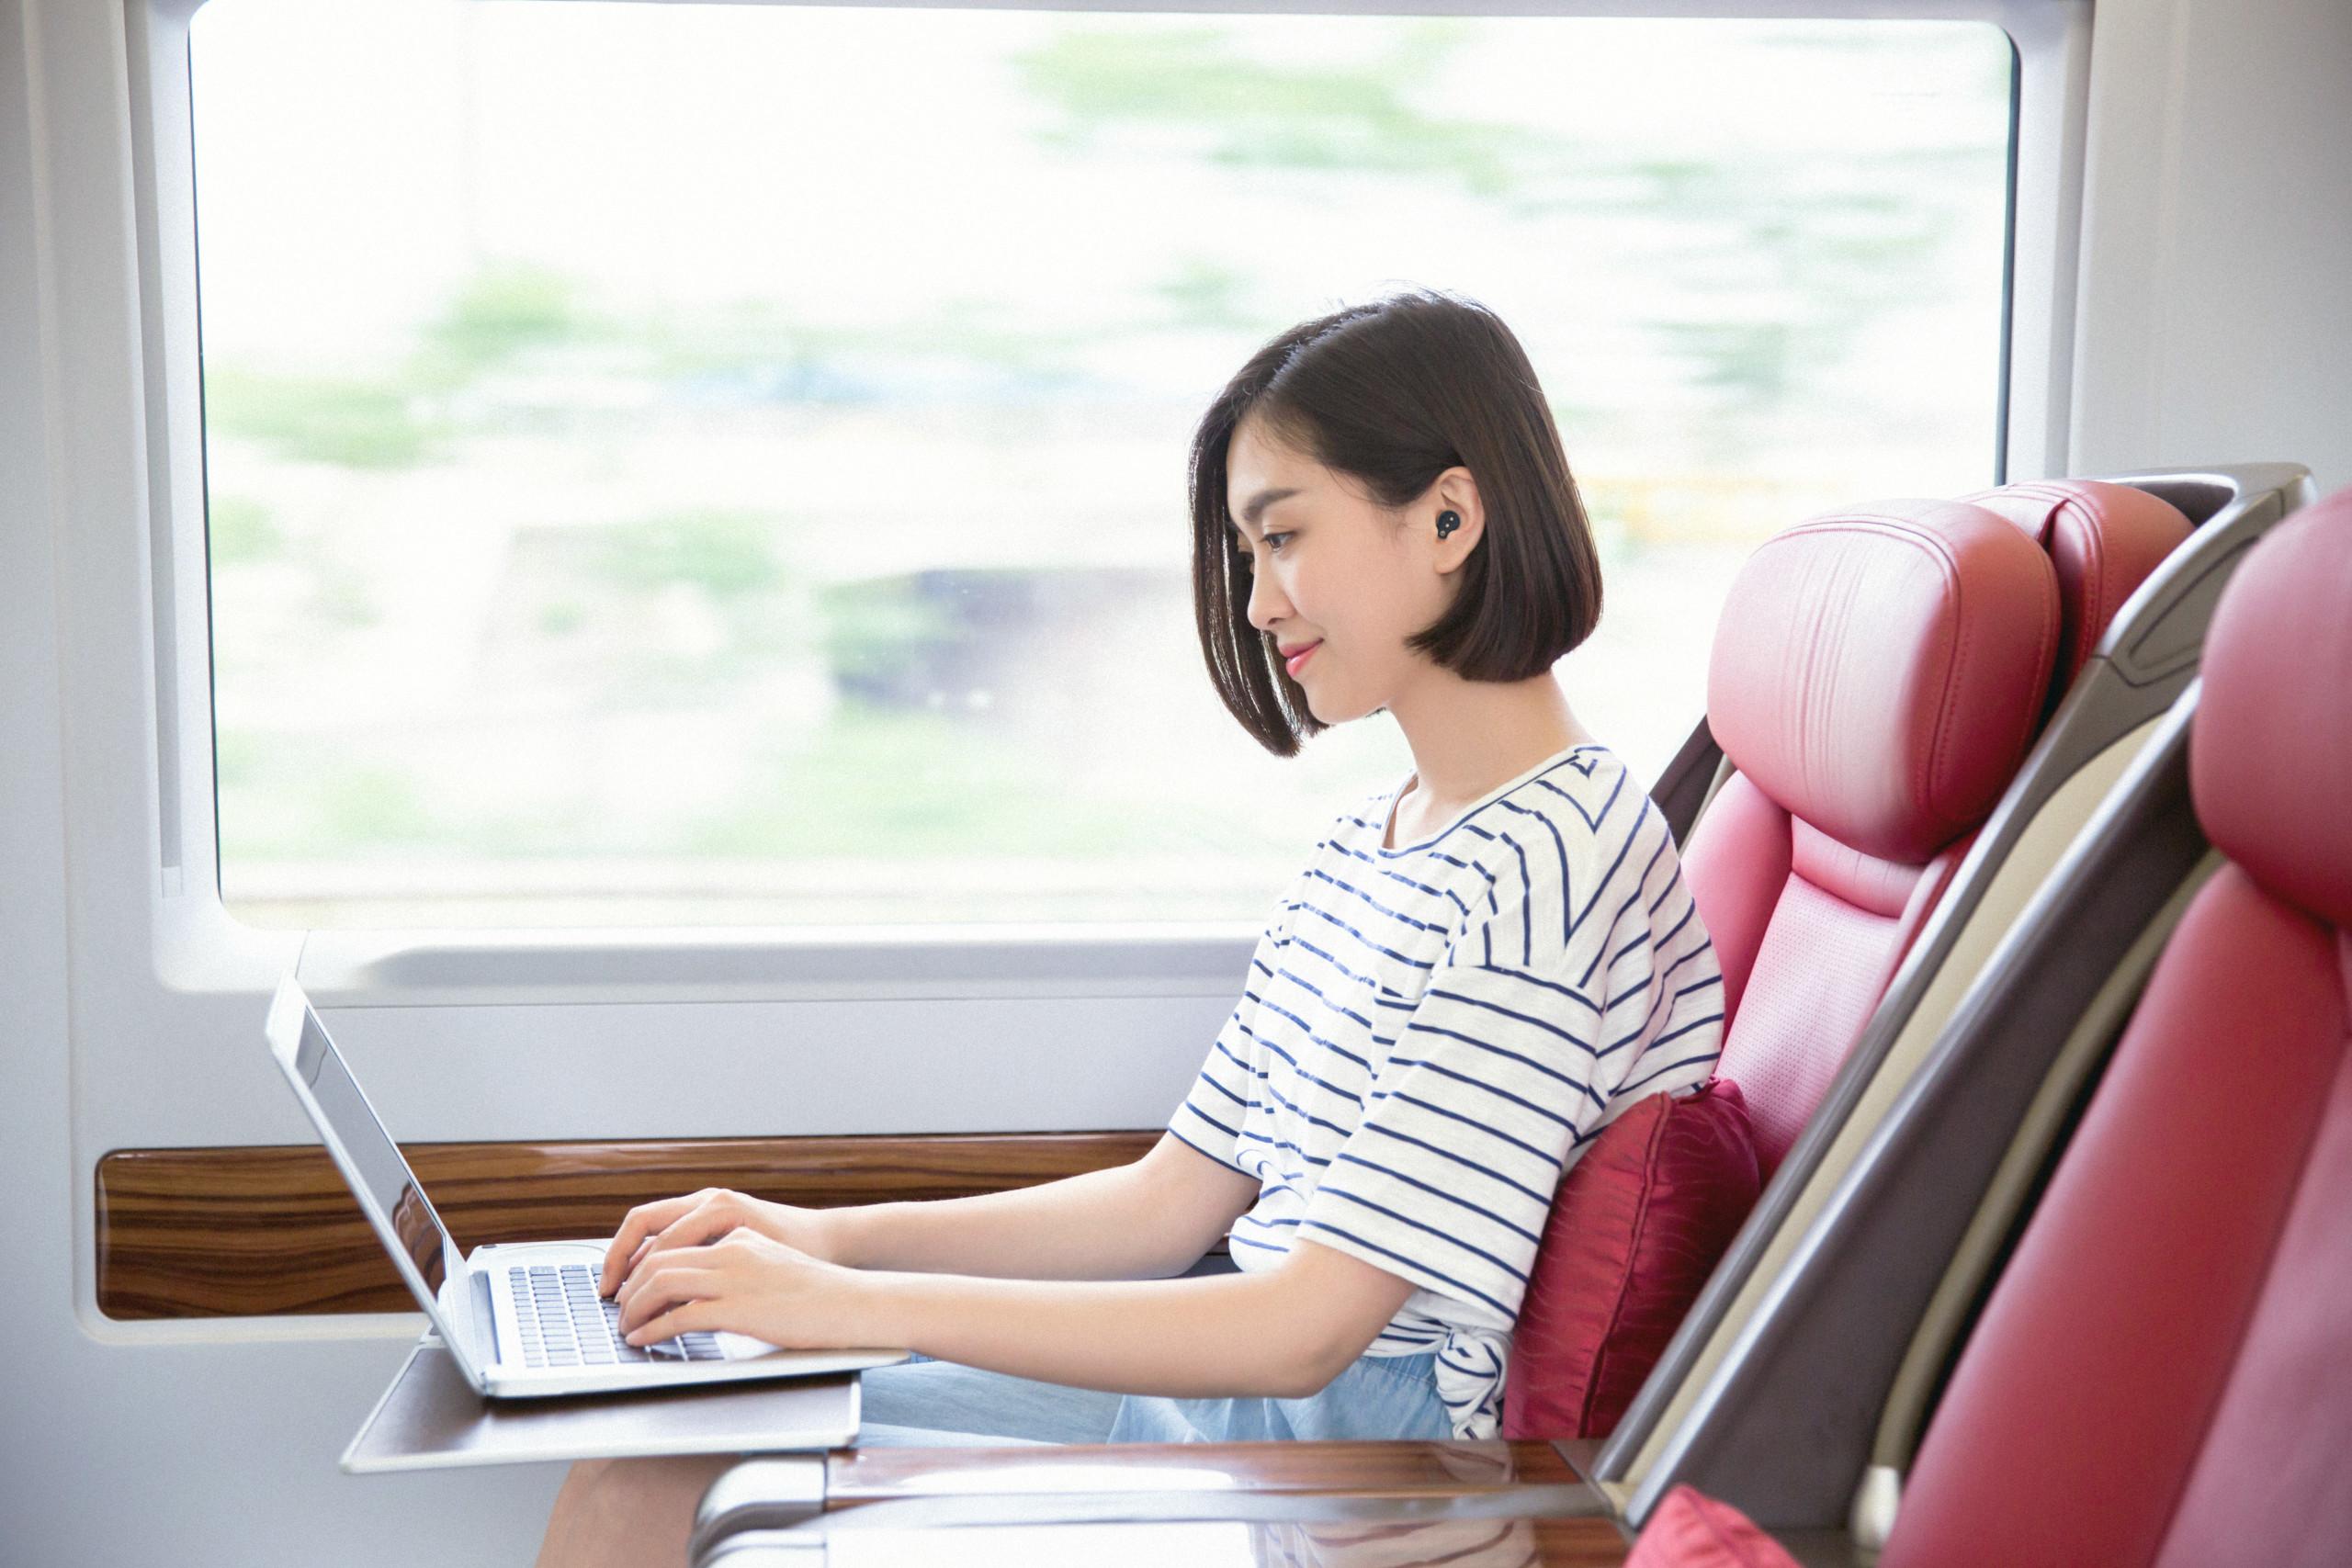 Woman sitting on train with laptop computer and earplugs.